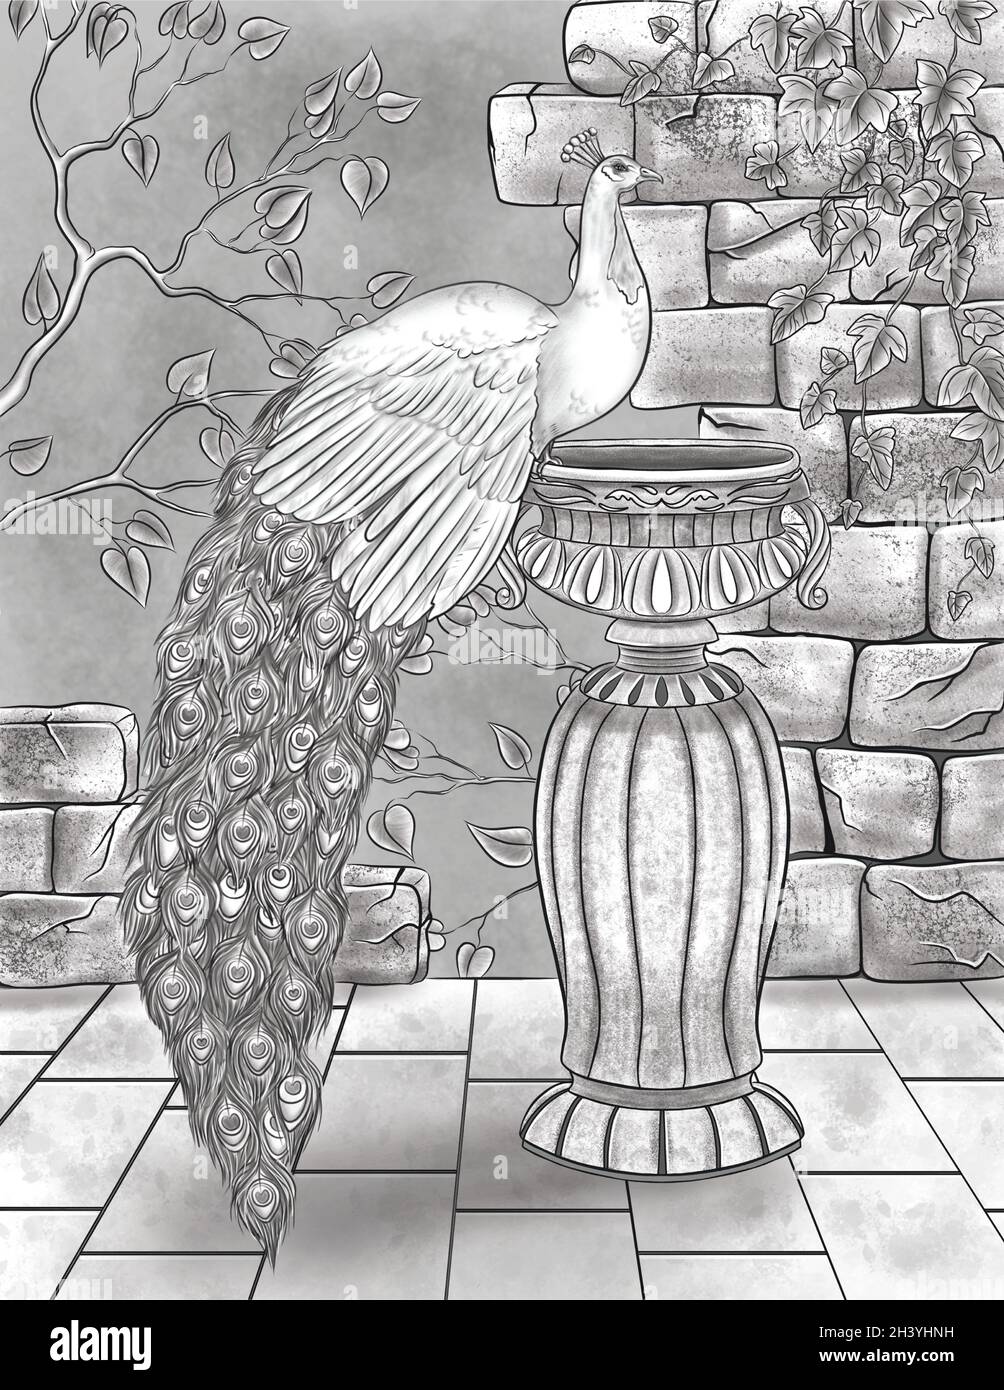 Beautiful Peacock Resting On A Water Basin With Broken Walls And Vines Colorless Line Drawing. Pretty Peafowl Standing On A Vase Stock Photo